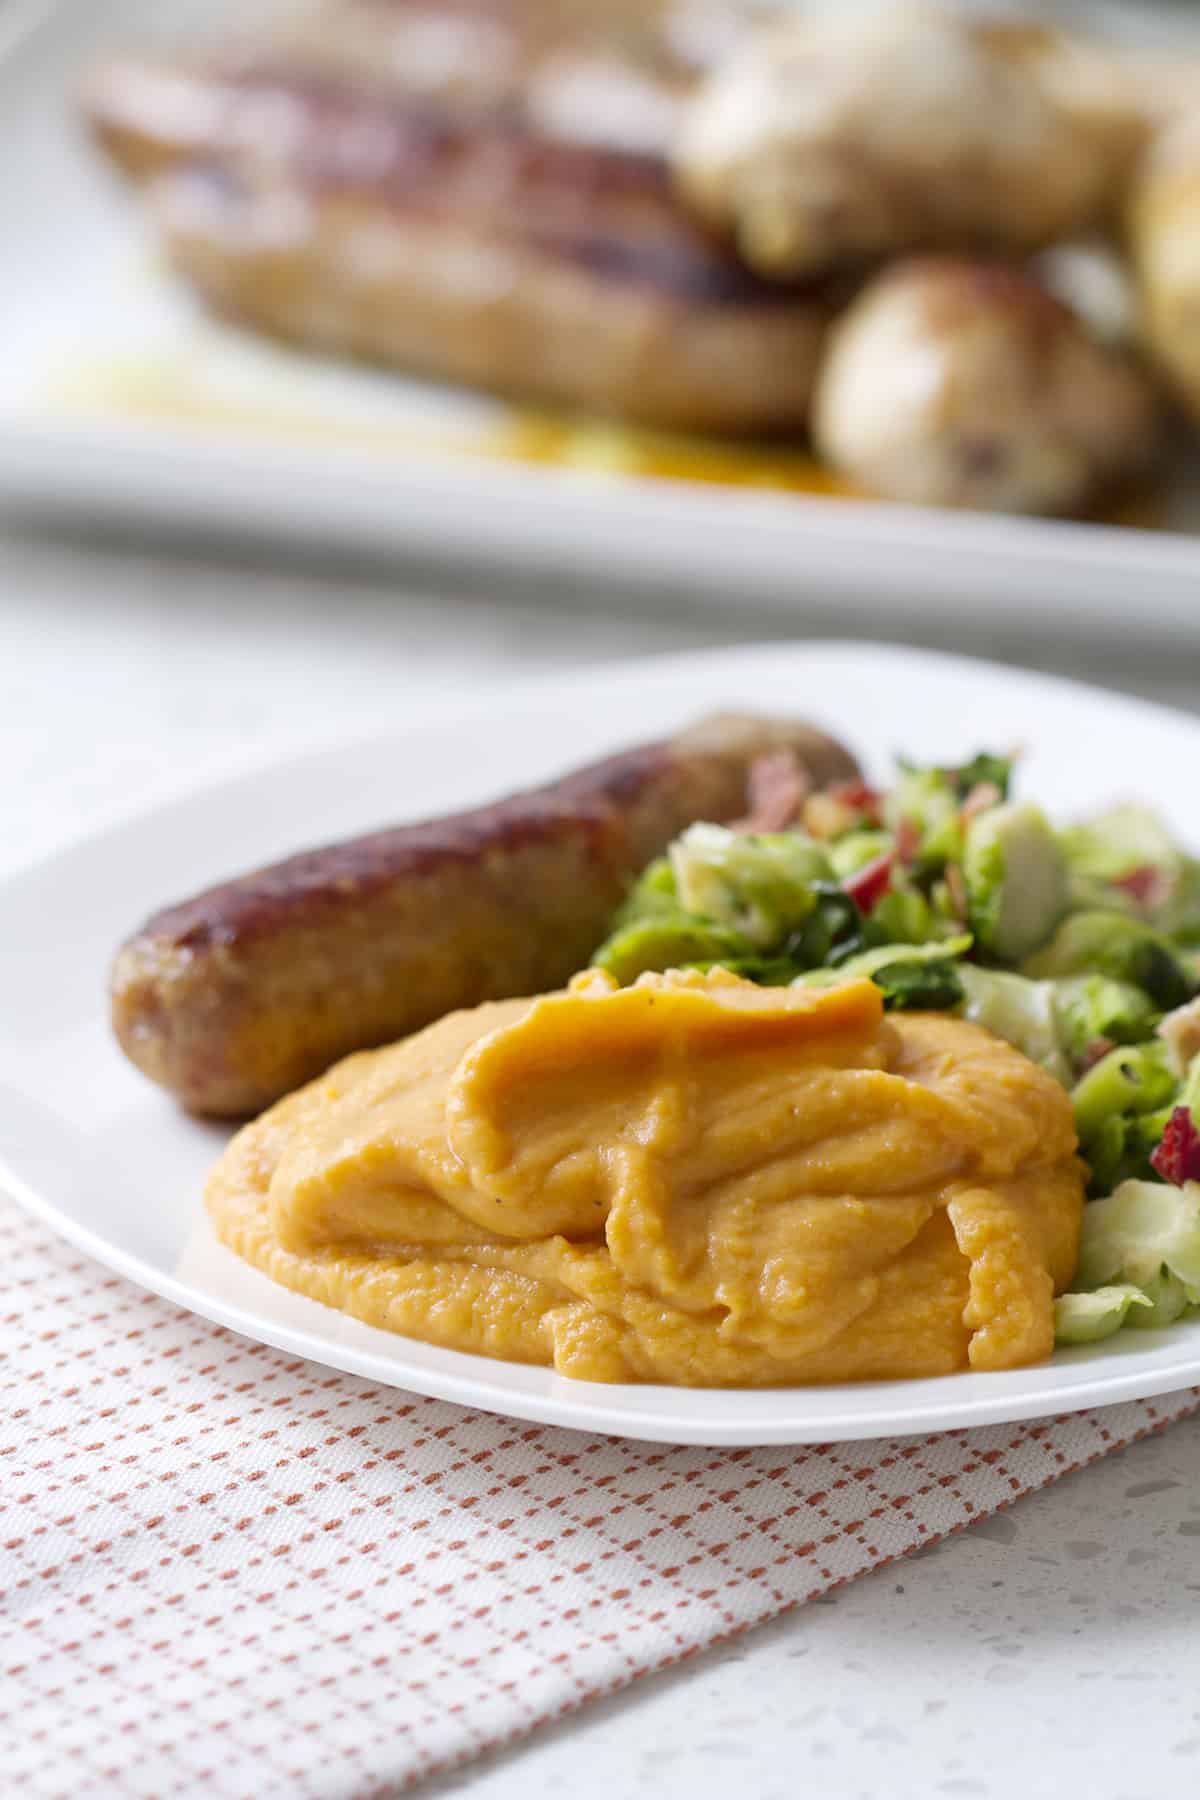 plateful of mashed sweet potatoes, sausage and brussel sprouts